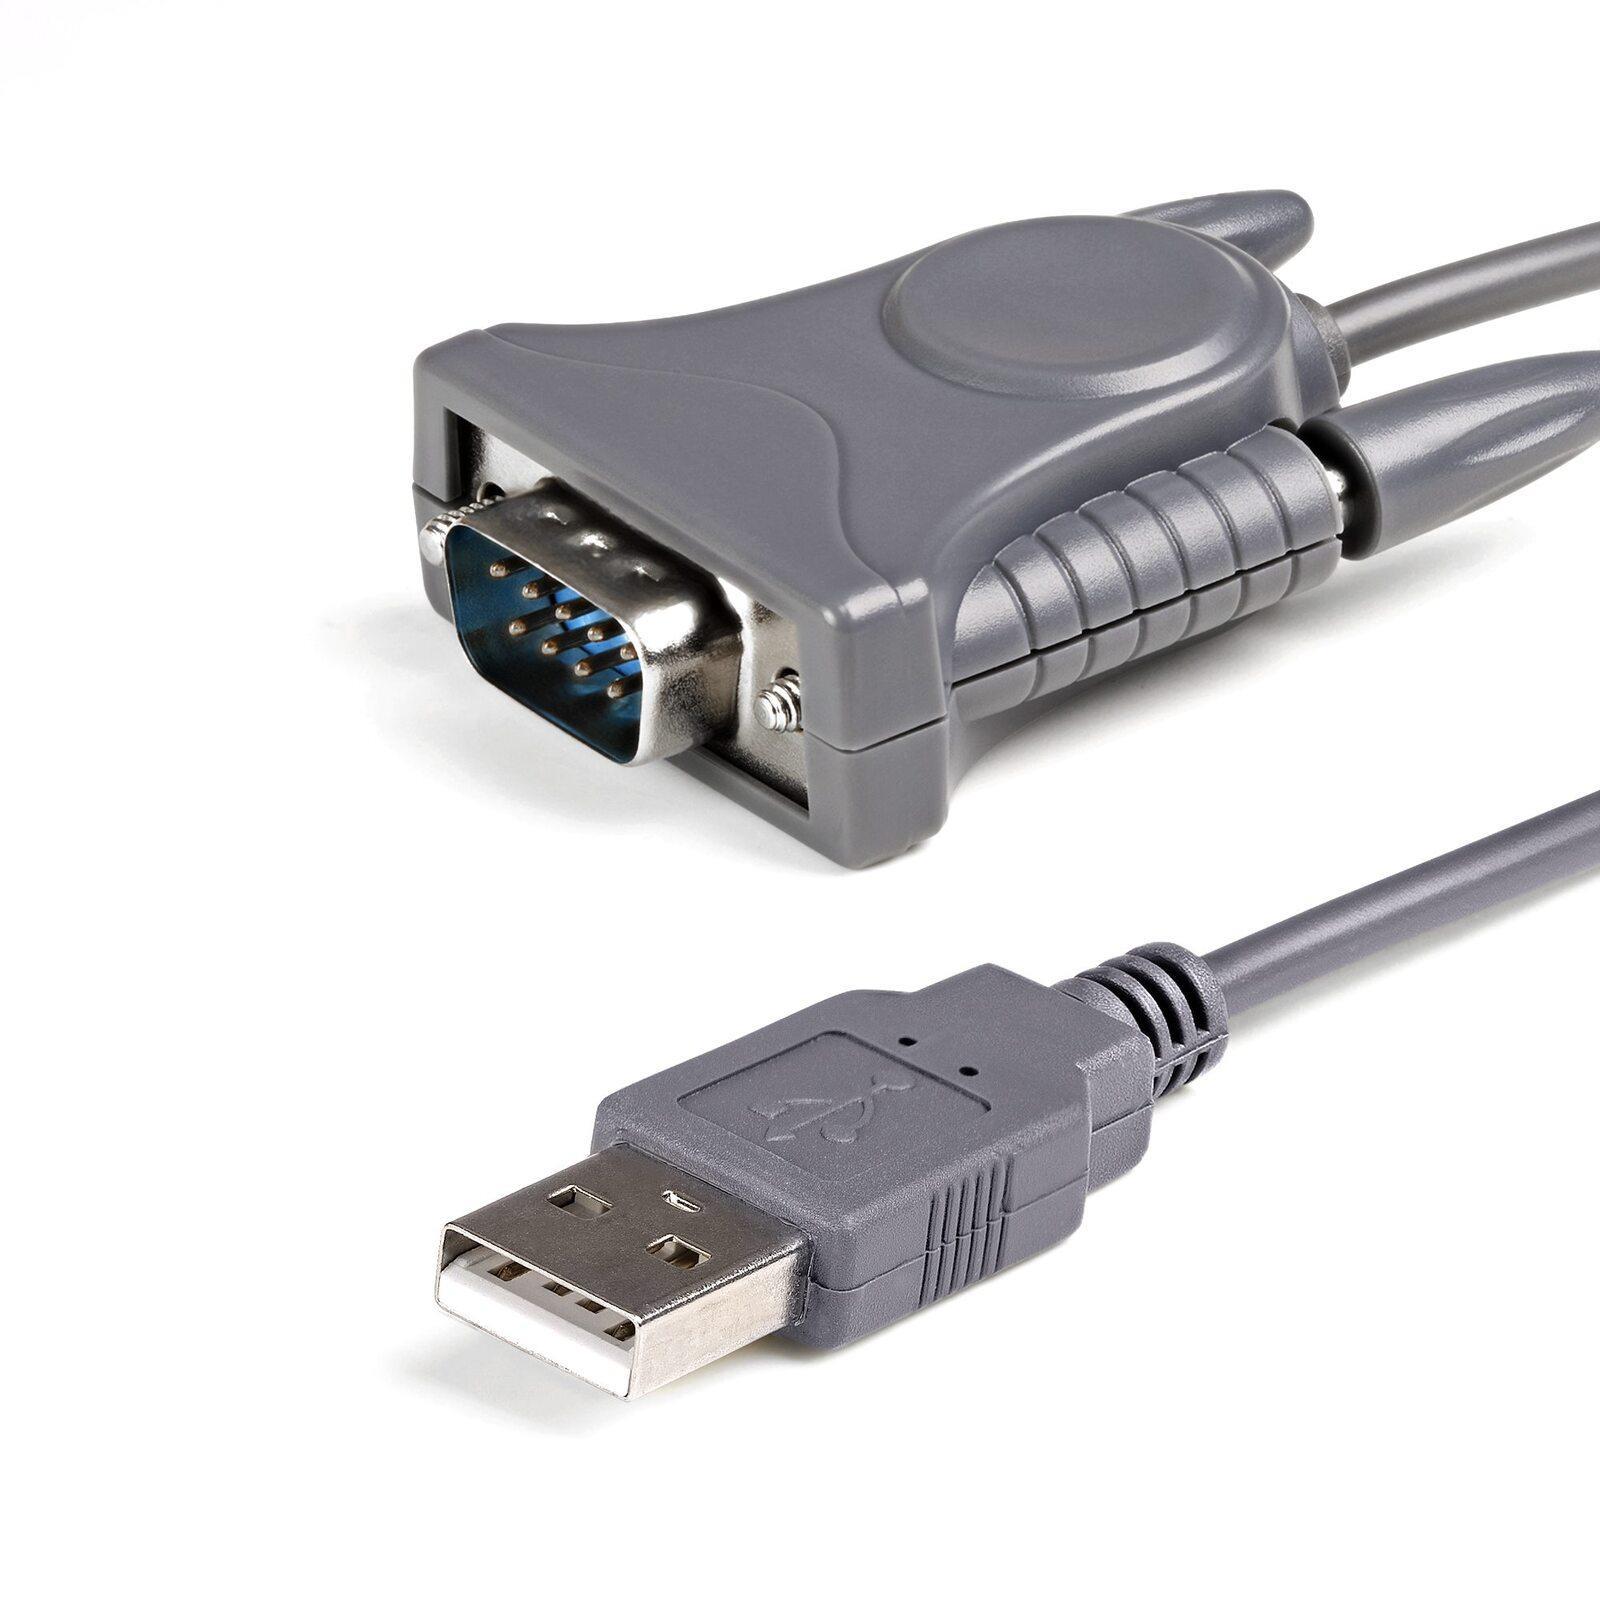 Star Tech USB to RS232 DB9/DB25 Serial Adapter Cable Cord for Notebook/Computer